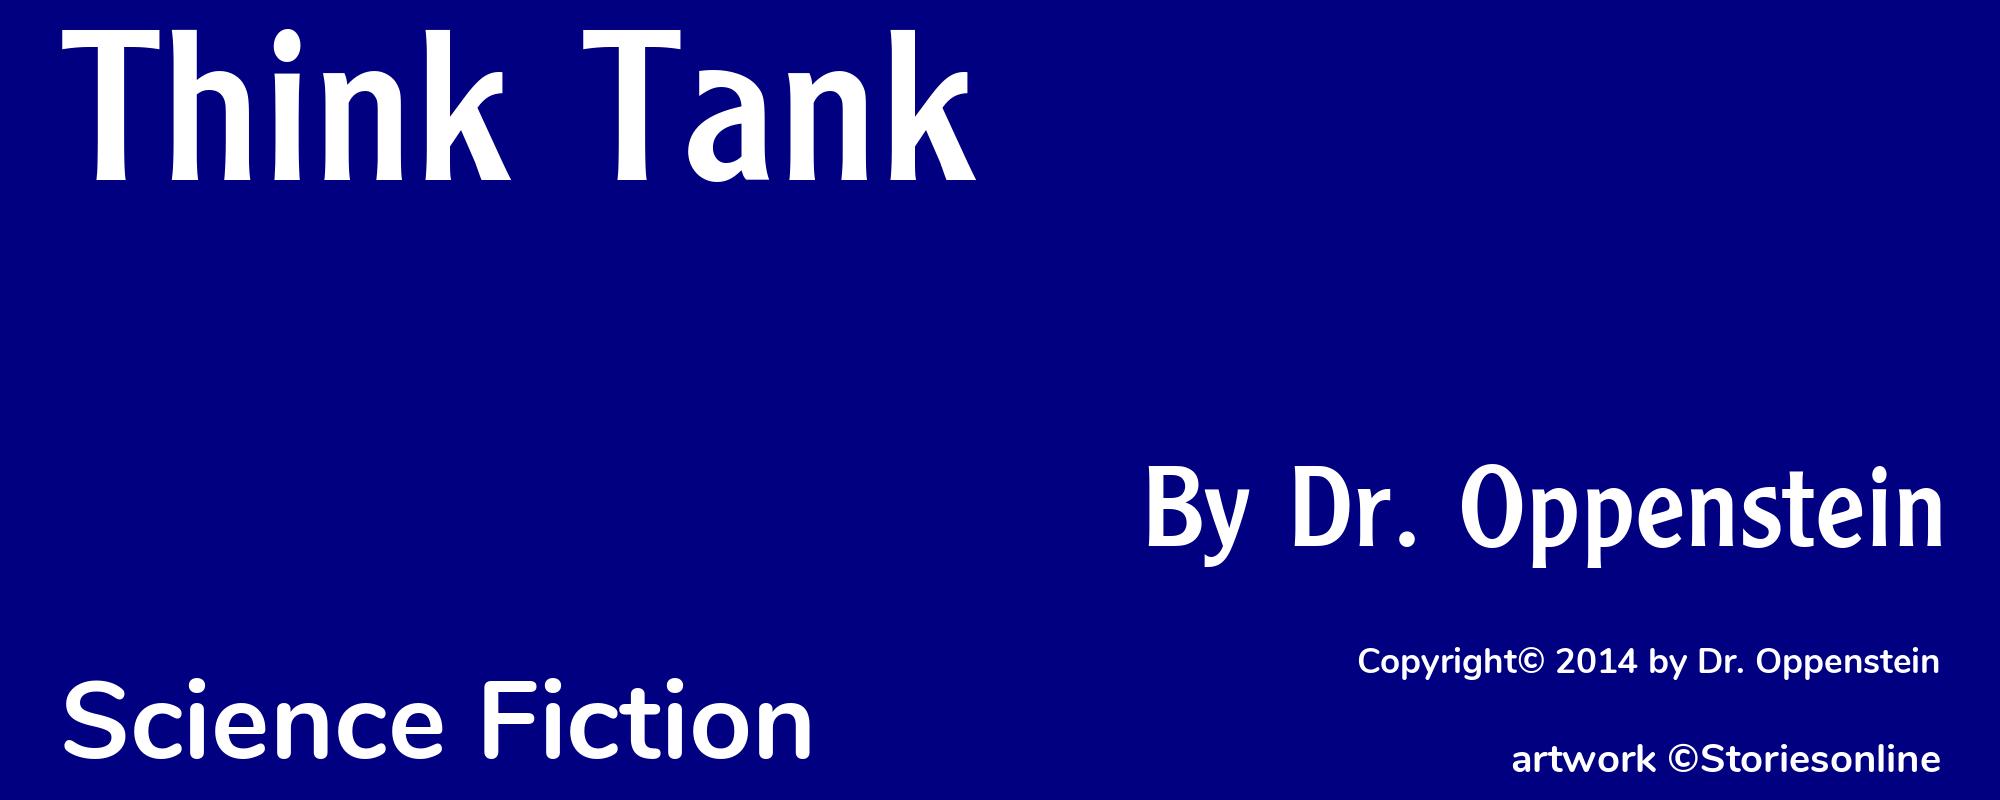 Think Tank - Cover